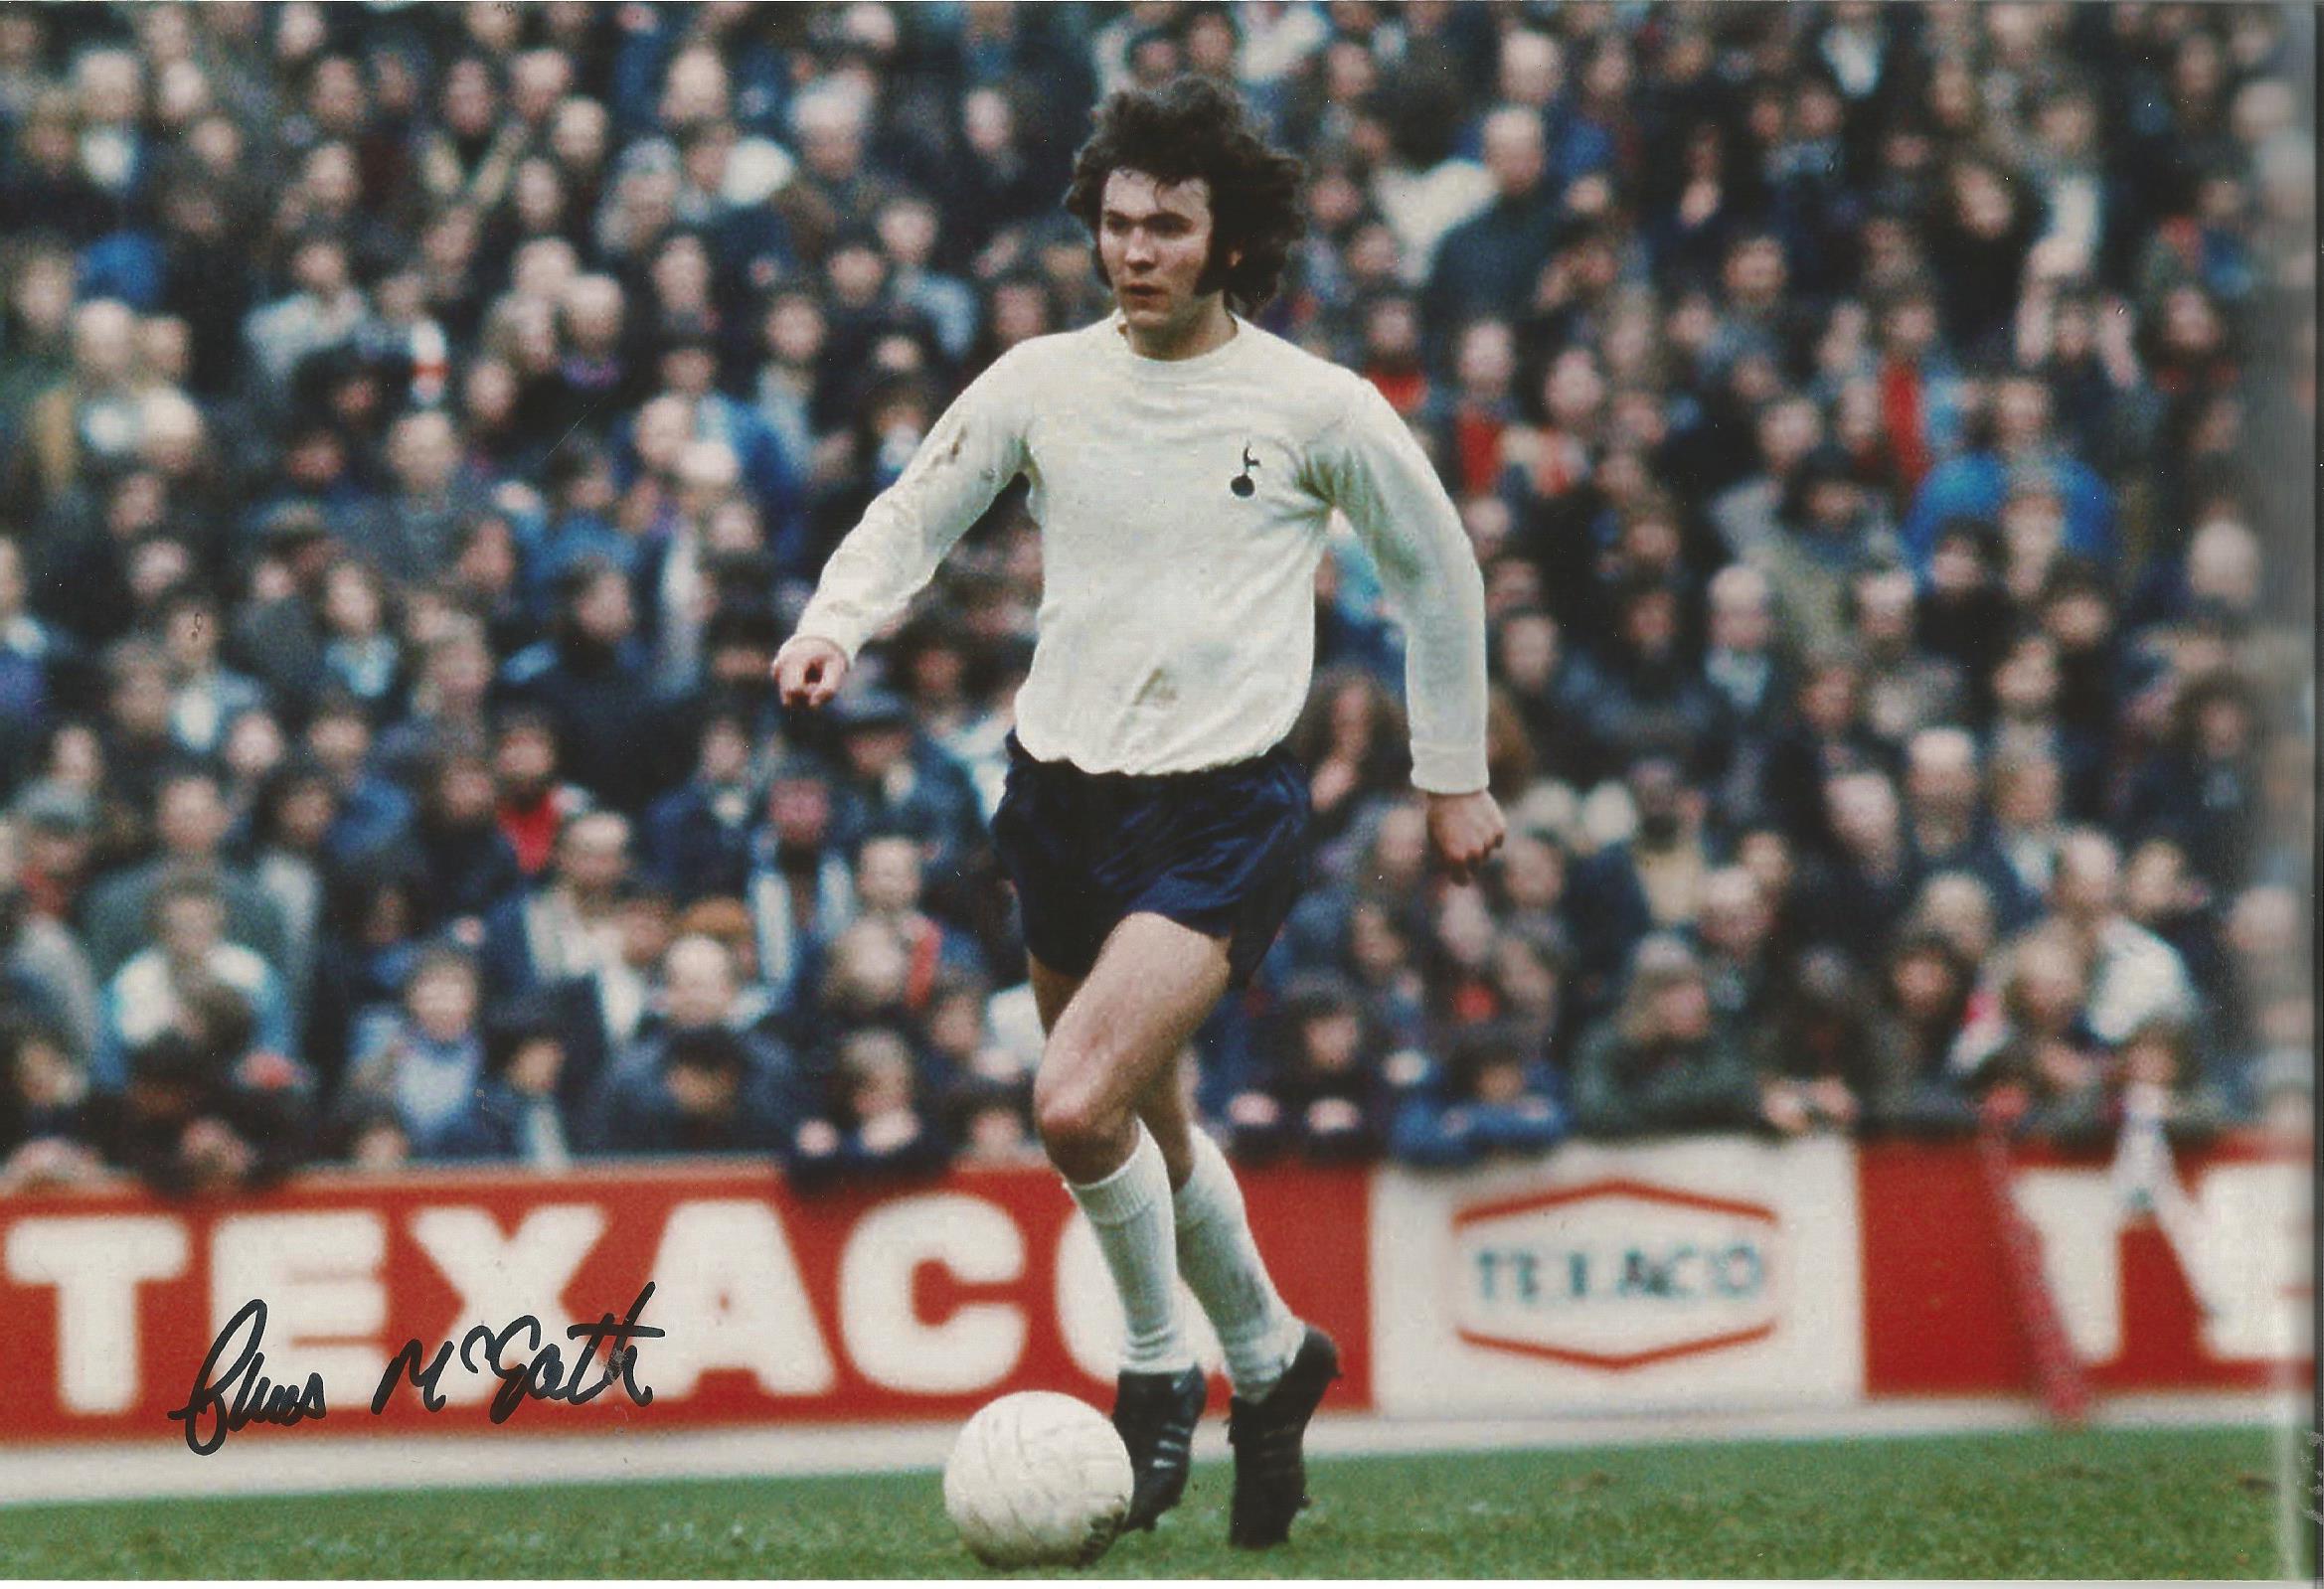 Autographed 12 x 8 photo football, CHRIS McGRATH, a superb image depicting the Tottenham winger in